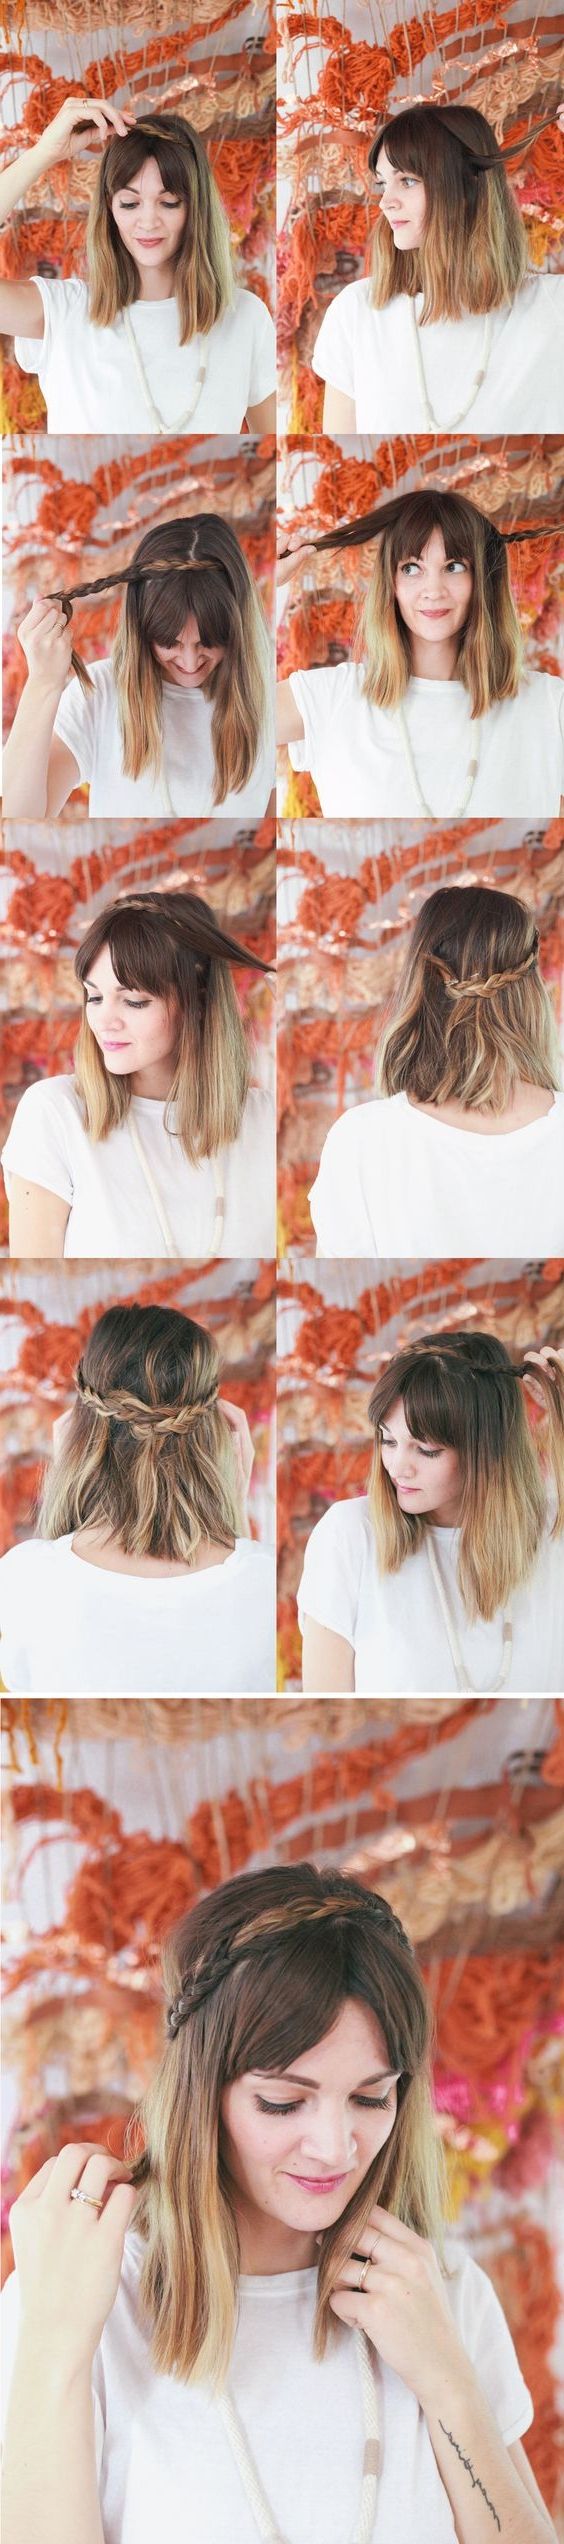 Trendy Midi Half Up Half Down Ponytail Hairstyles For 18 Half Up Hairstyles For Short And Medium Length Hair To Try Now (View 7 of 20)